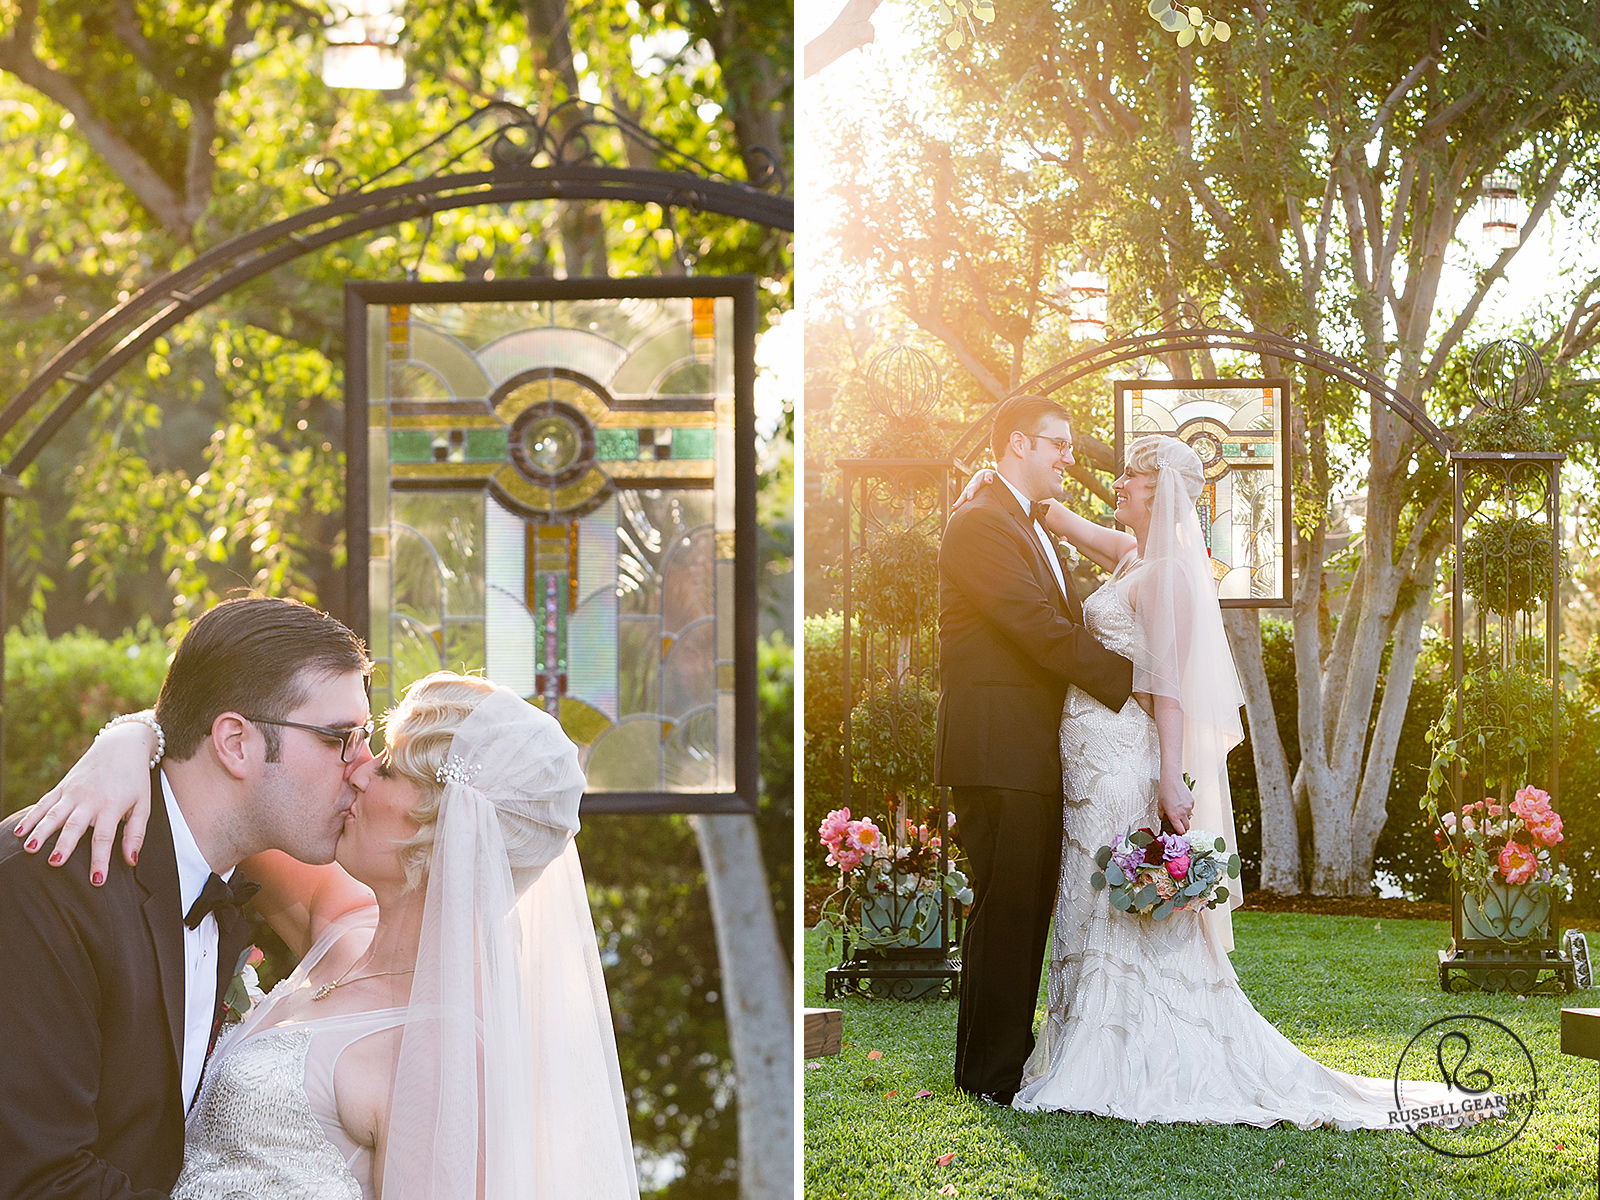 Sunset Bride and Groom Portrait - Stained Glass Window Arbor - Orange County Backyard Wedding – Russell Gearhart Photography – www.gearhartphoto.com